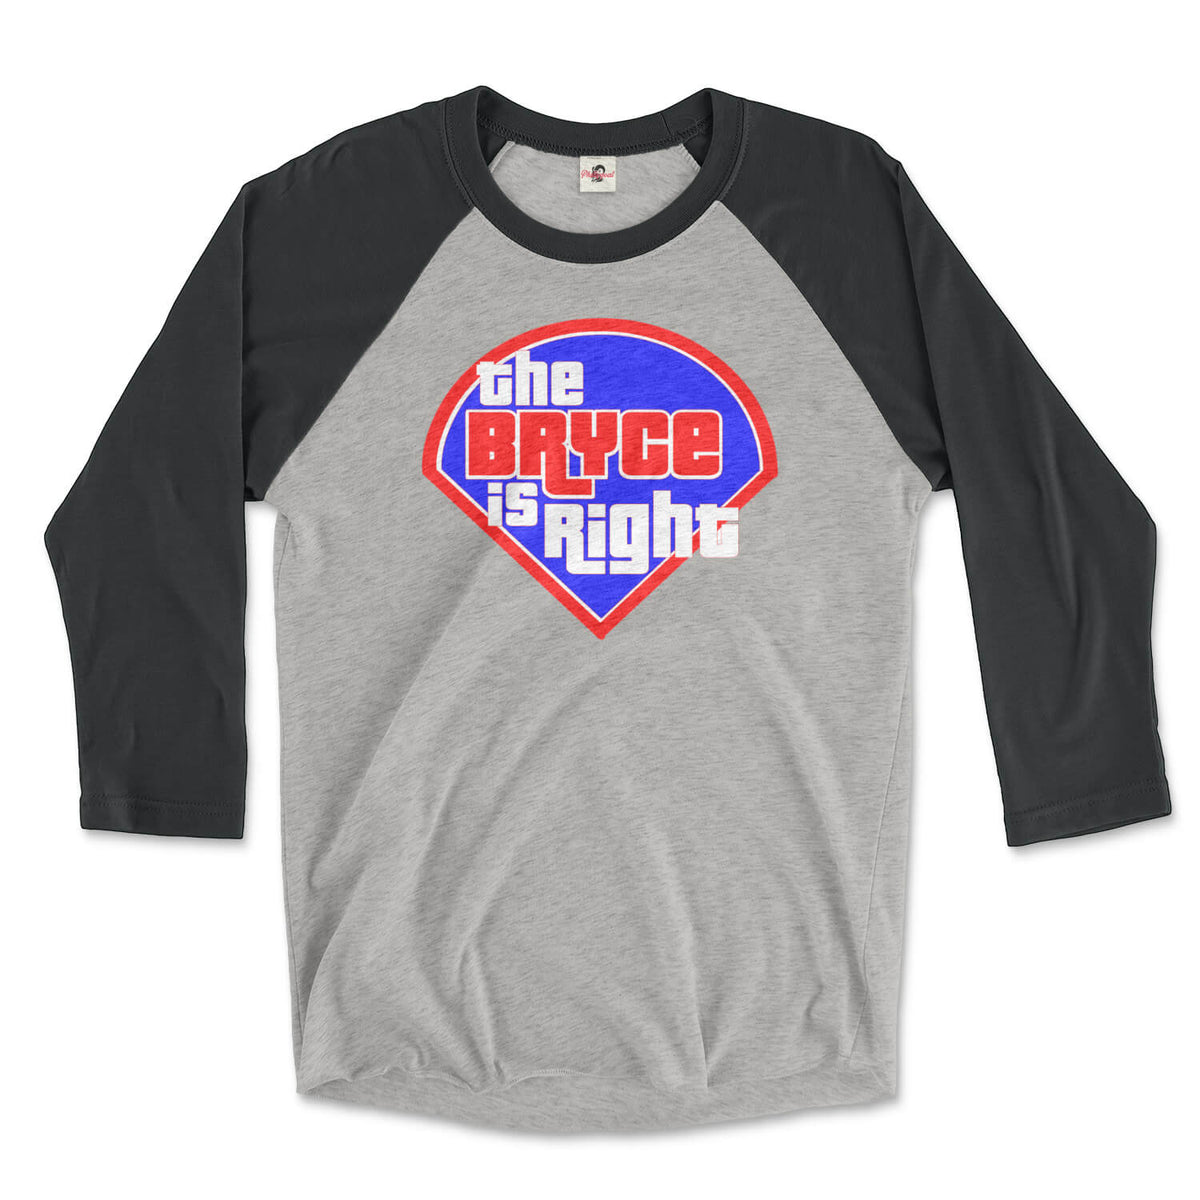 bryce harper the bryce is right vintage black and premium heather 3/4 raglan tee from phillygoat